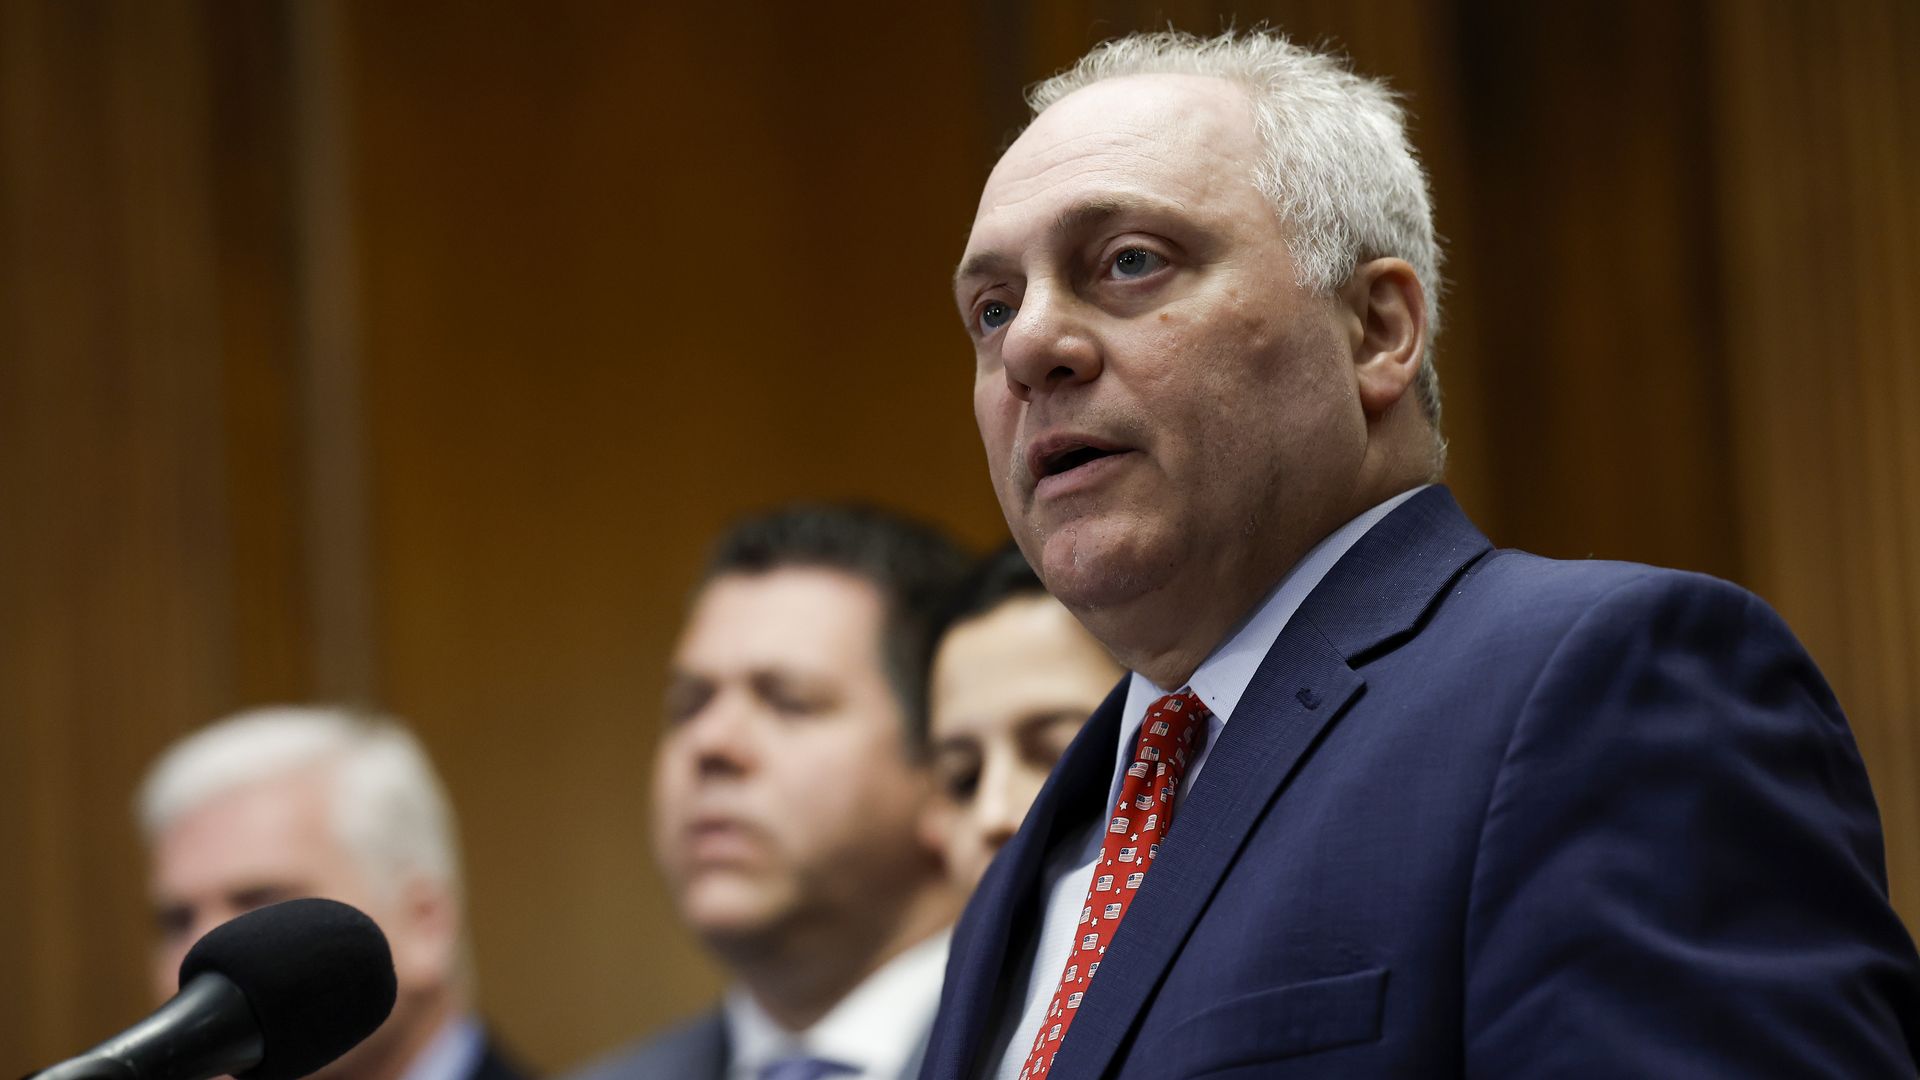 Steve Scalise diagnosed with multiple myeloma, a type of blood cancer